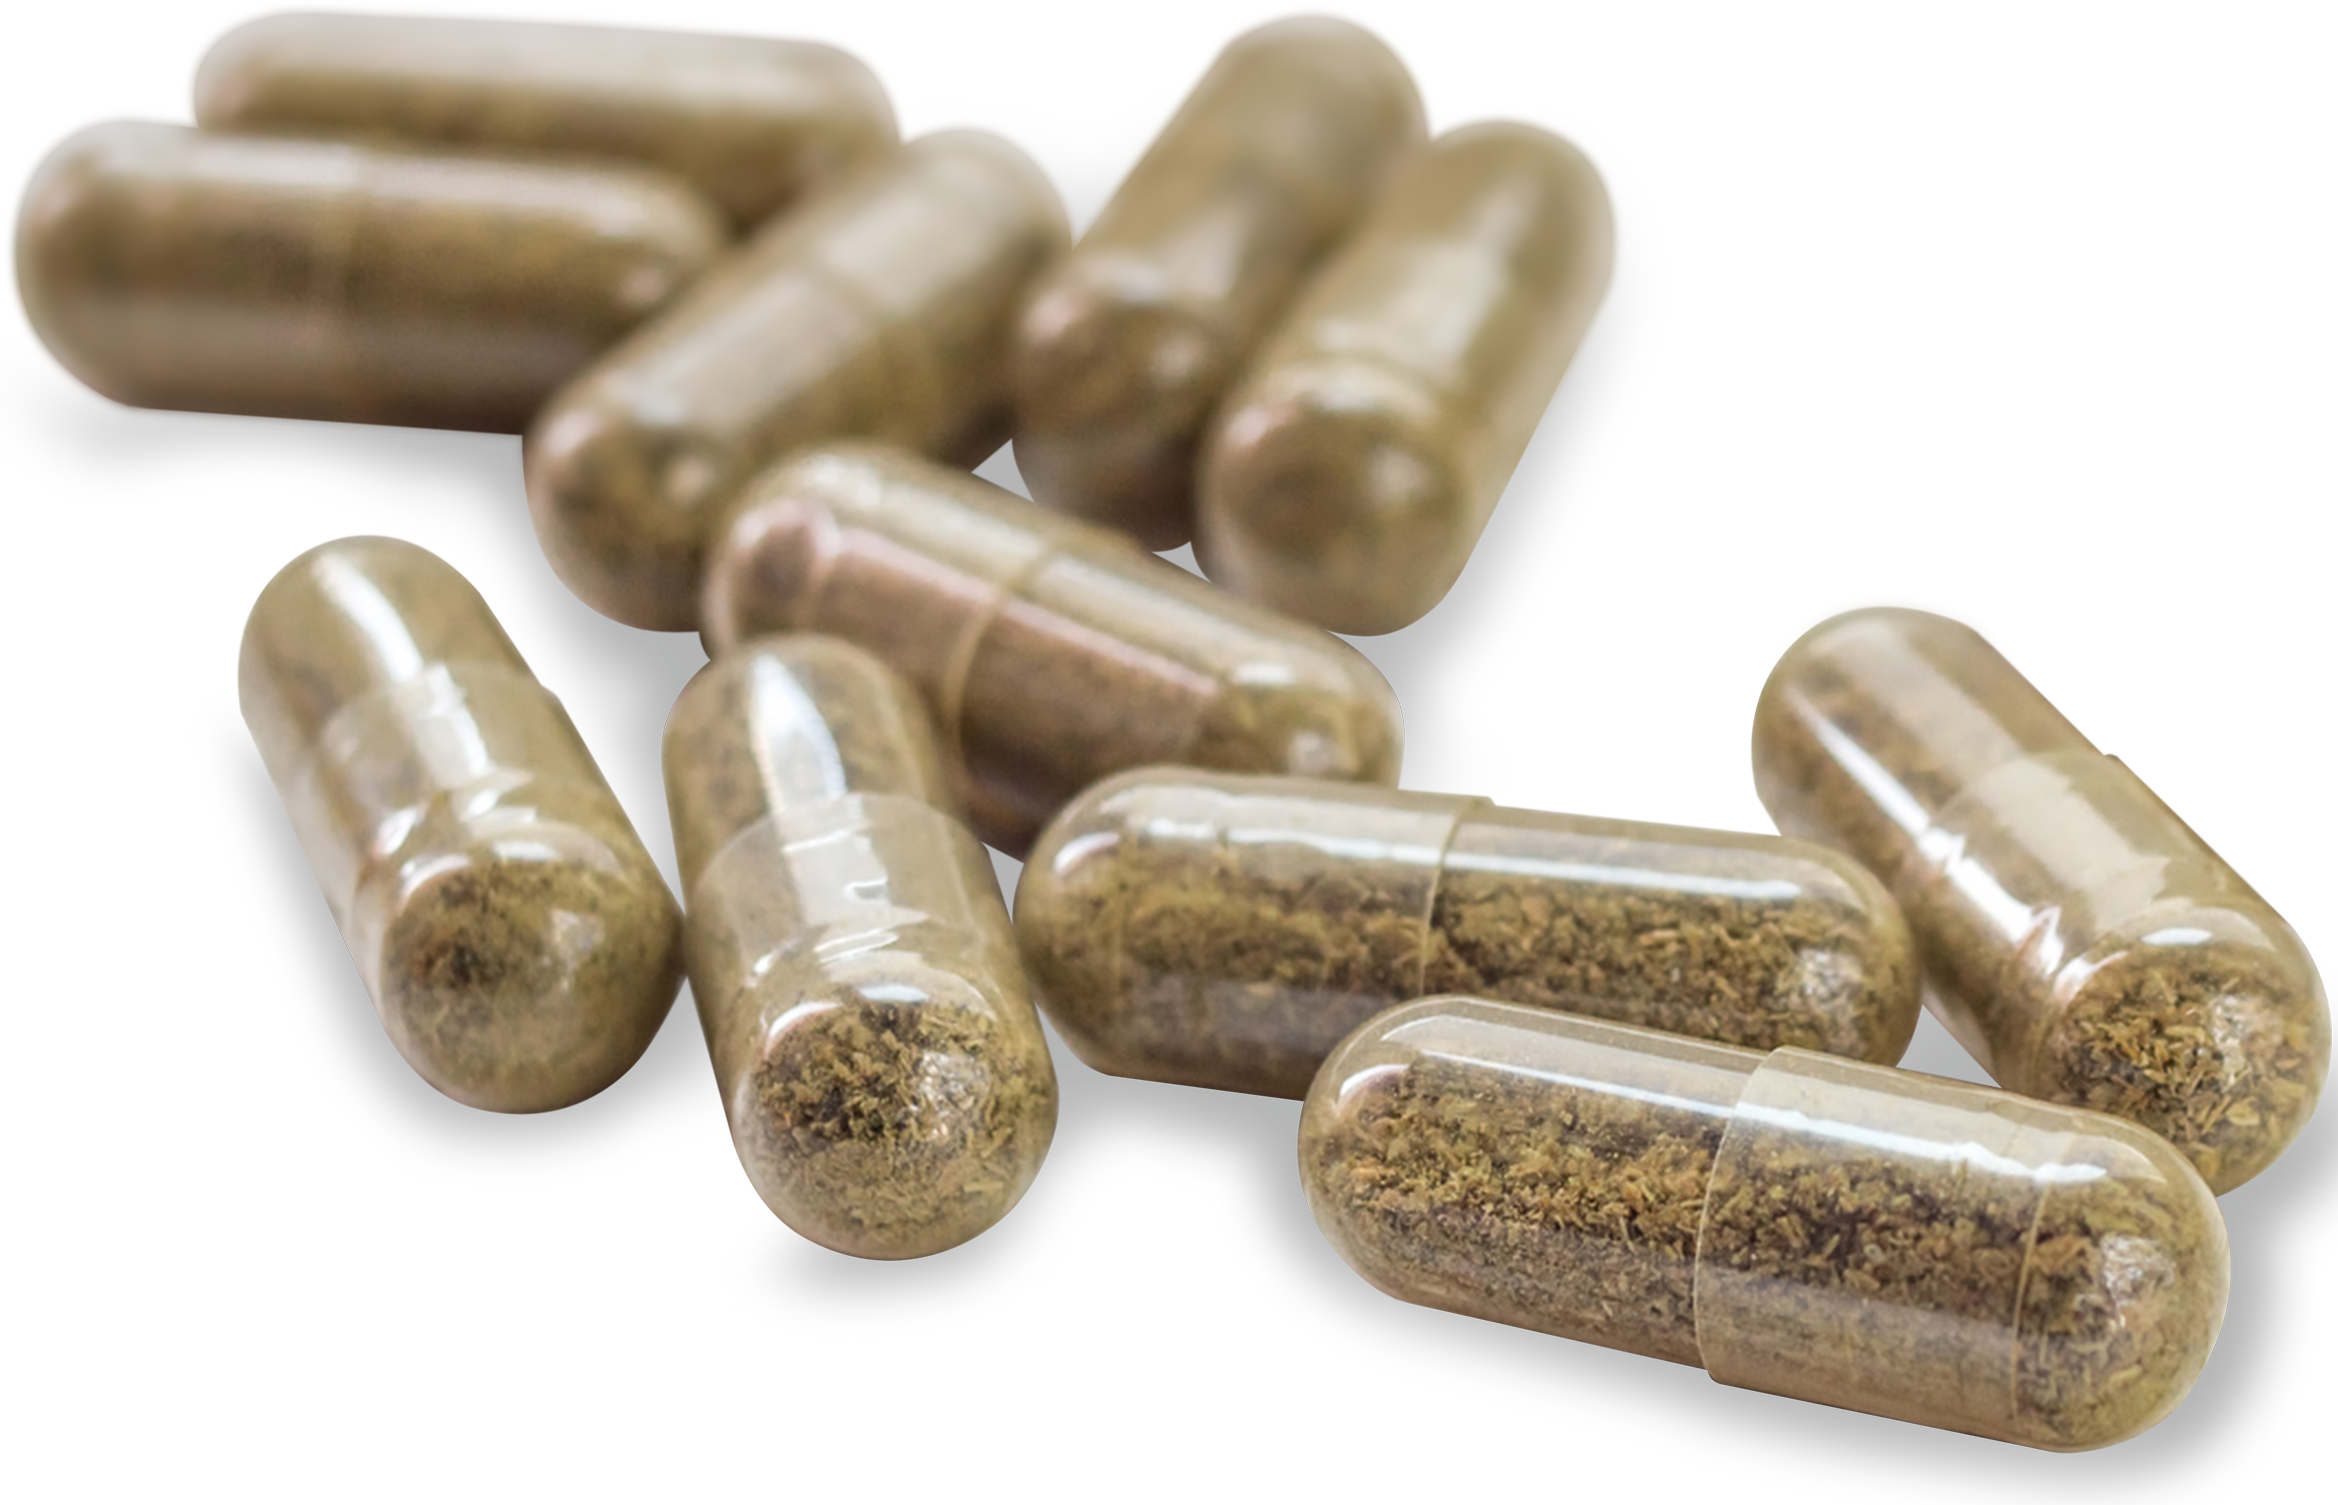 Eleven transparent CBD capsules laying close to each other